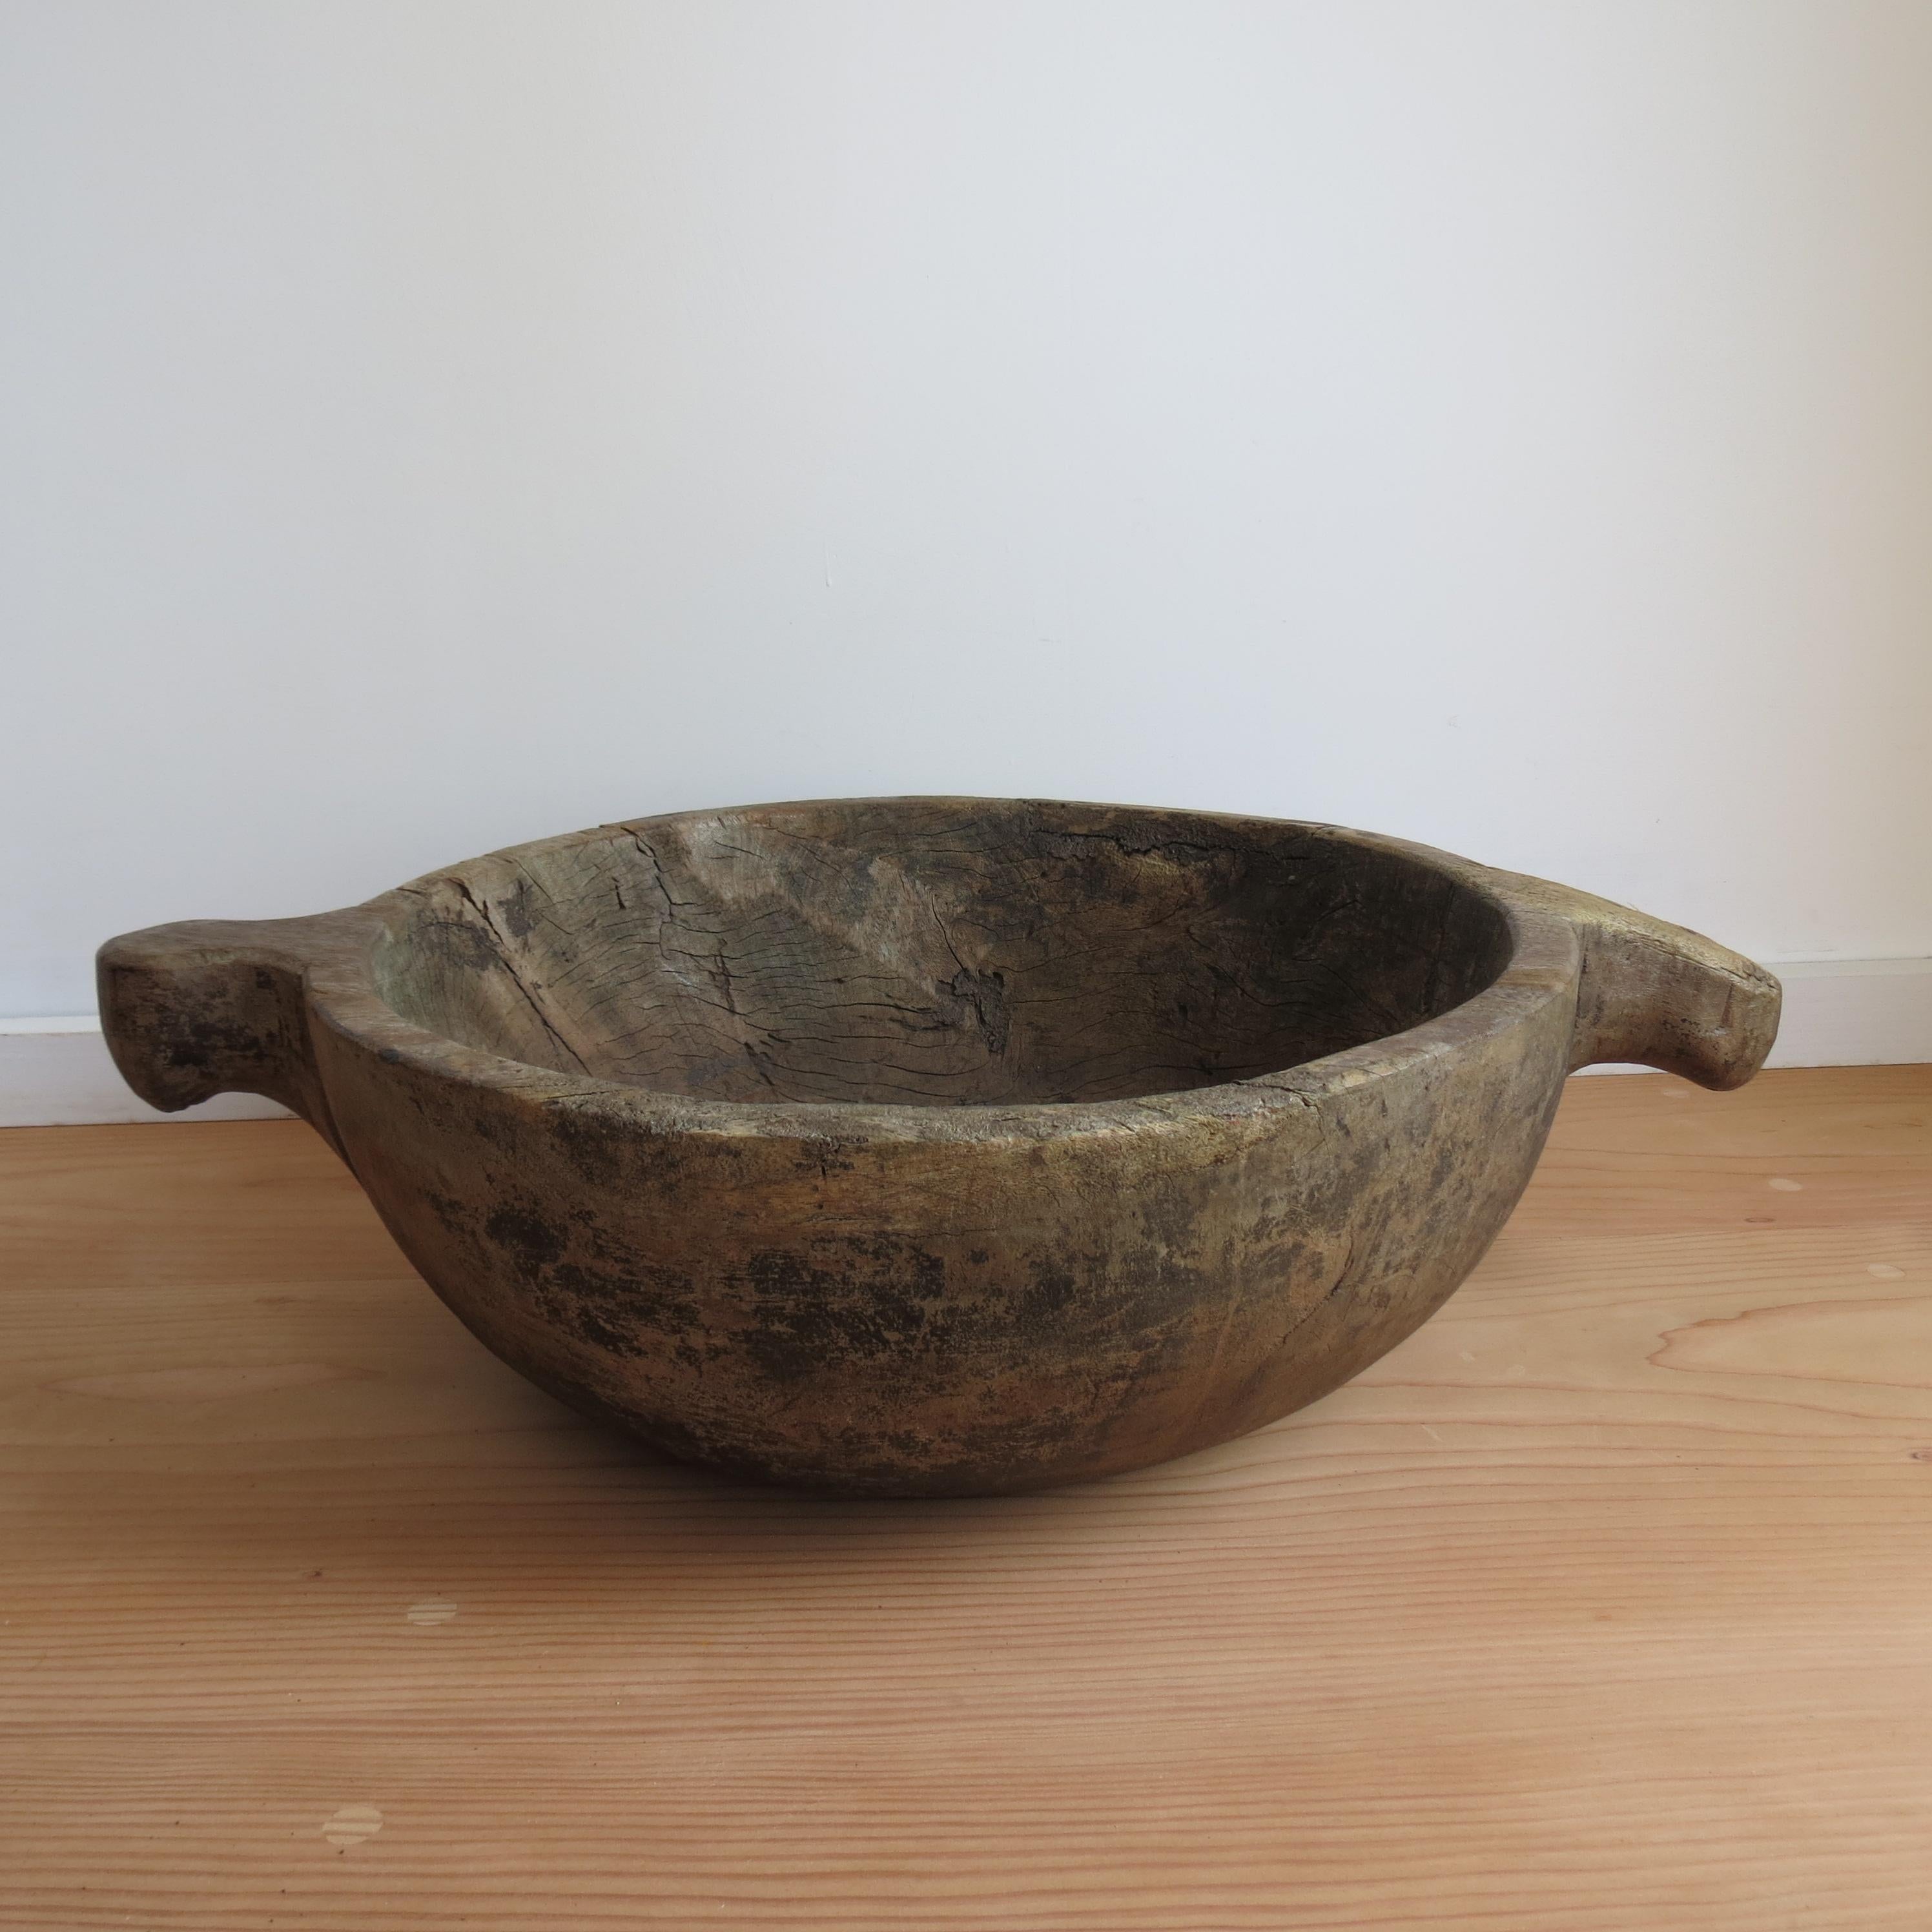 A very large rustic wooden bowl with two handles originally from the early 20th century. One solid piece of wood has been hand carved, with a decorated handle either side of the large bowl. Originally from Africa. Very much in the Wabi Sabi Style,